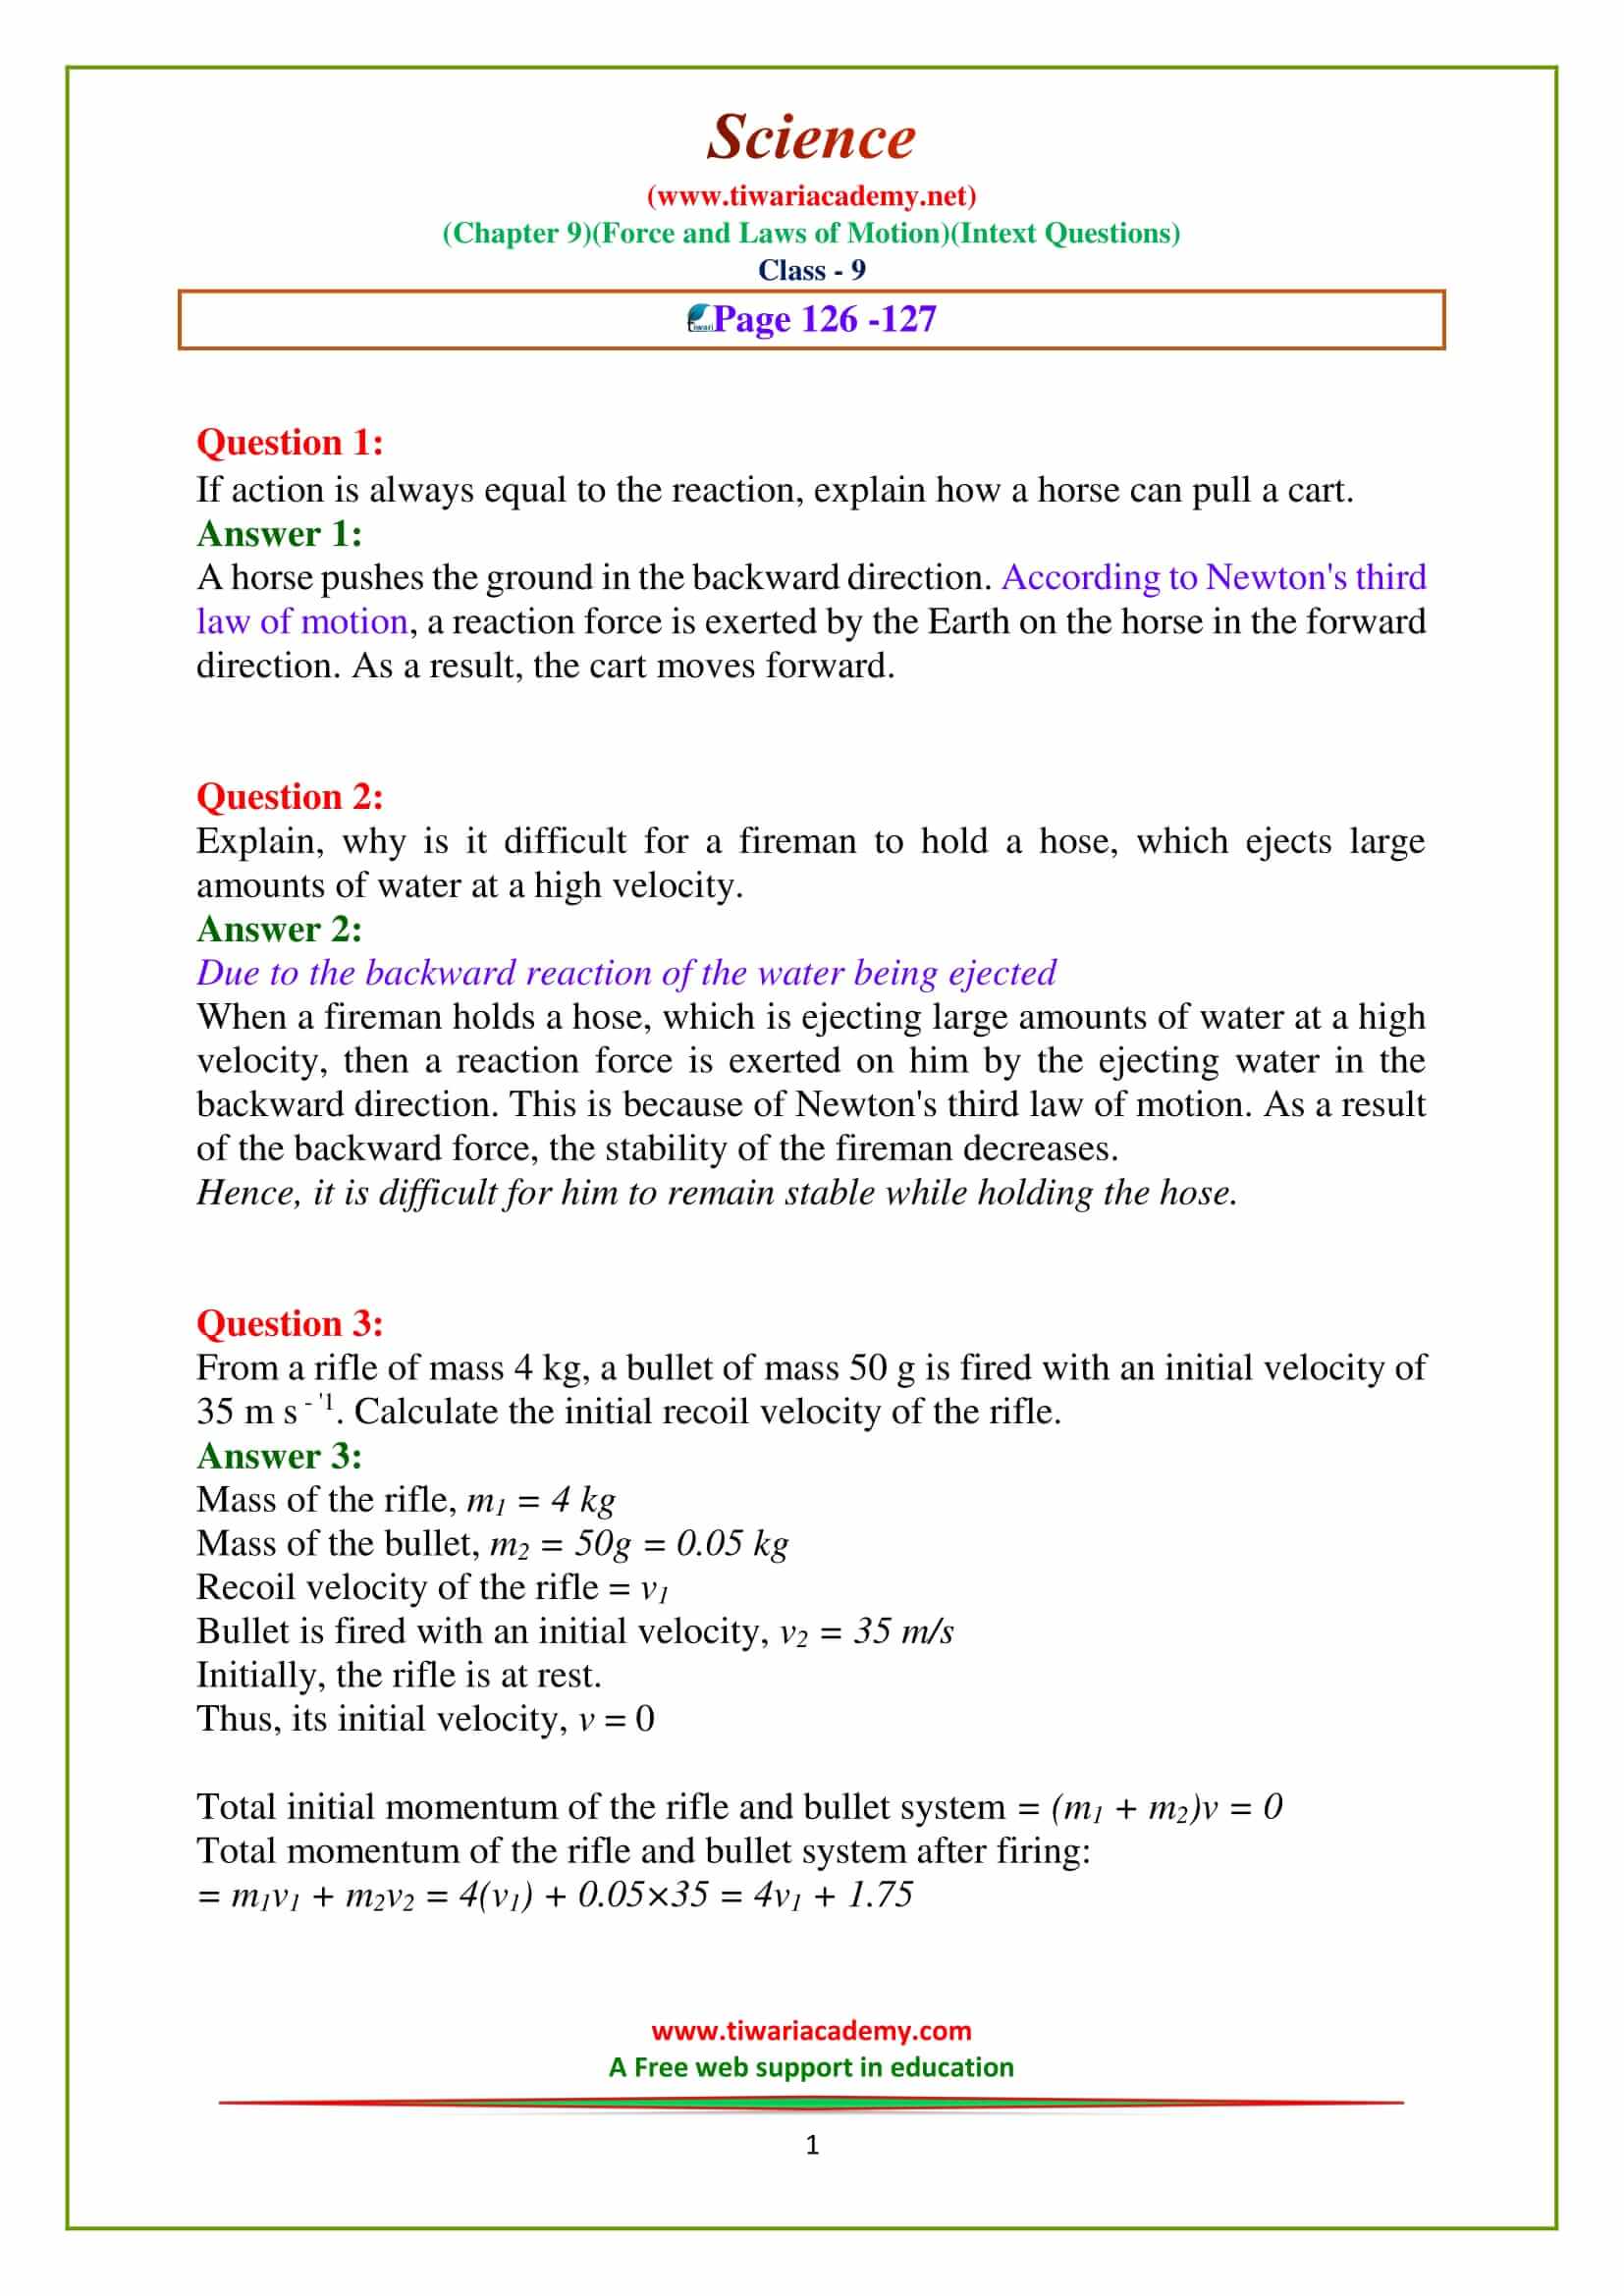 NCERT Solutions for Class 9 Science Chapter 9 force and laws of motion Intext questions on page 126